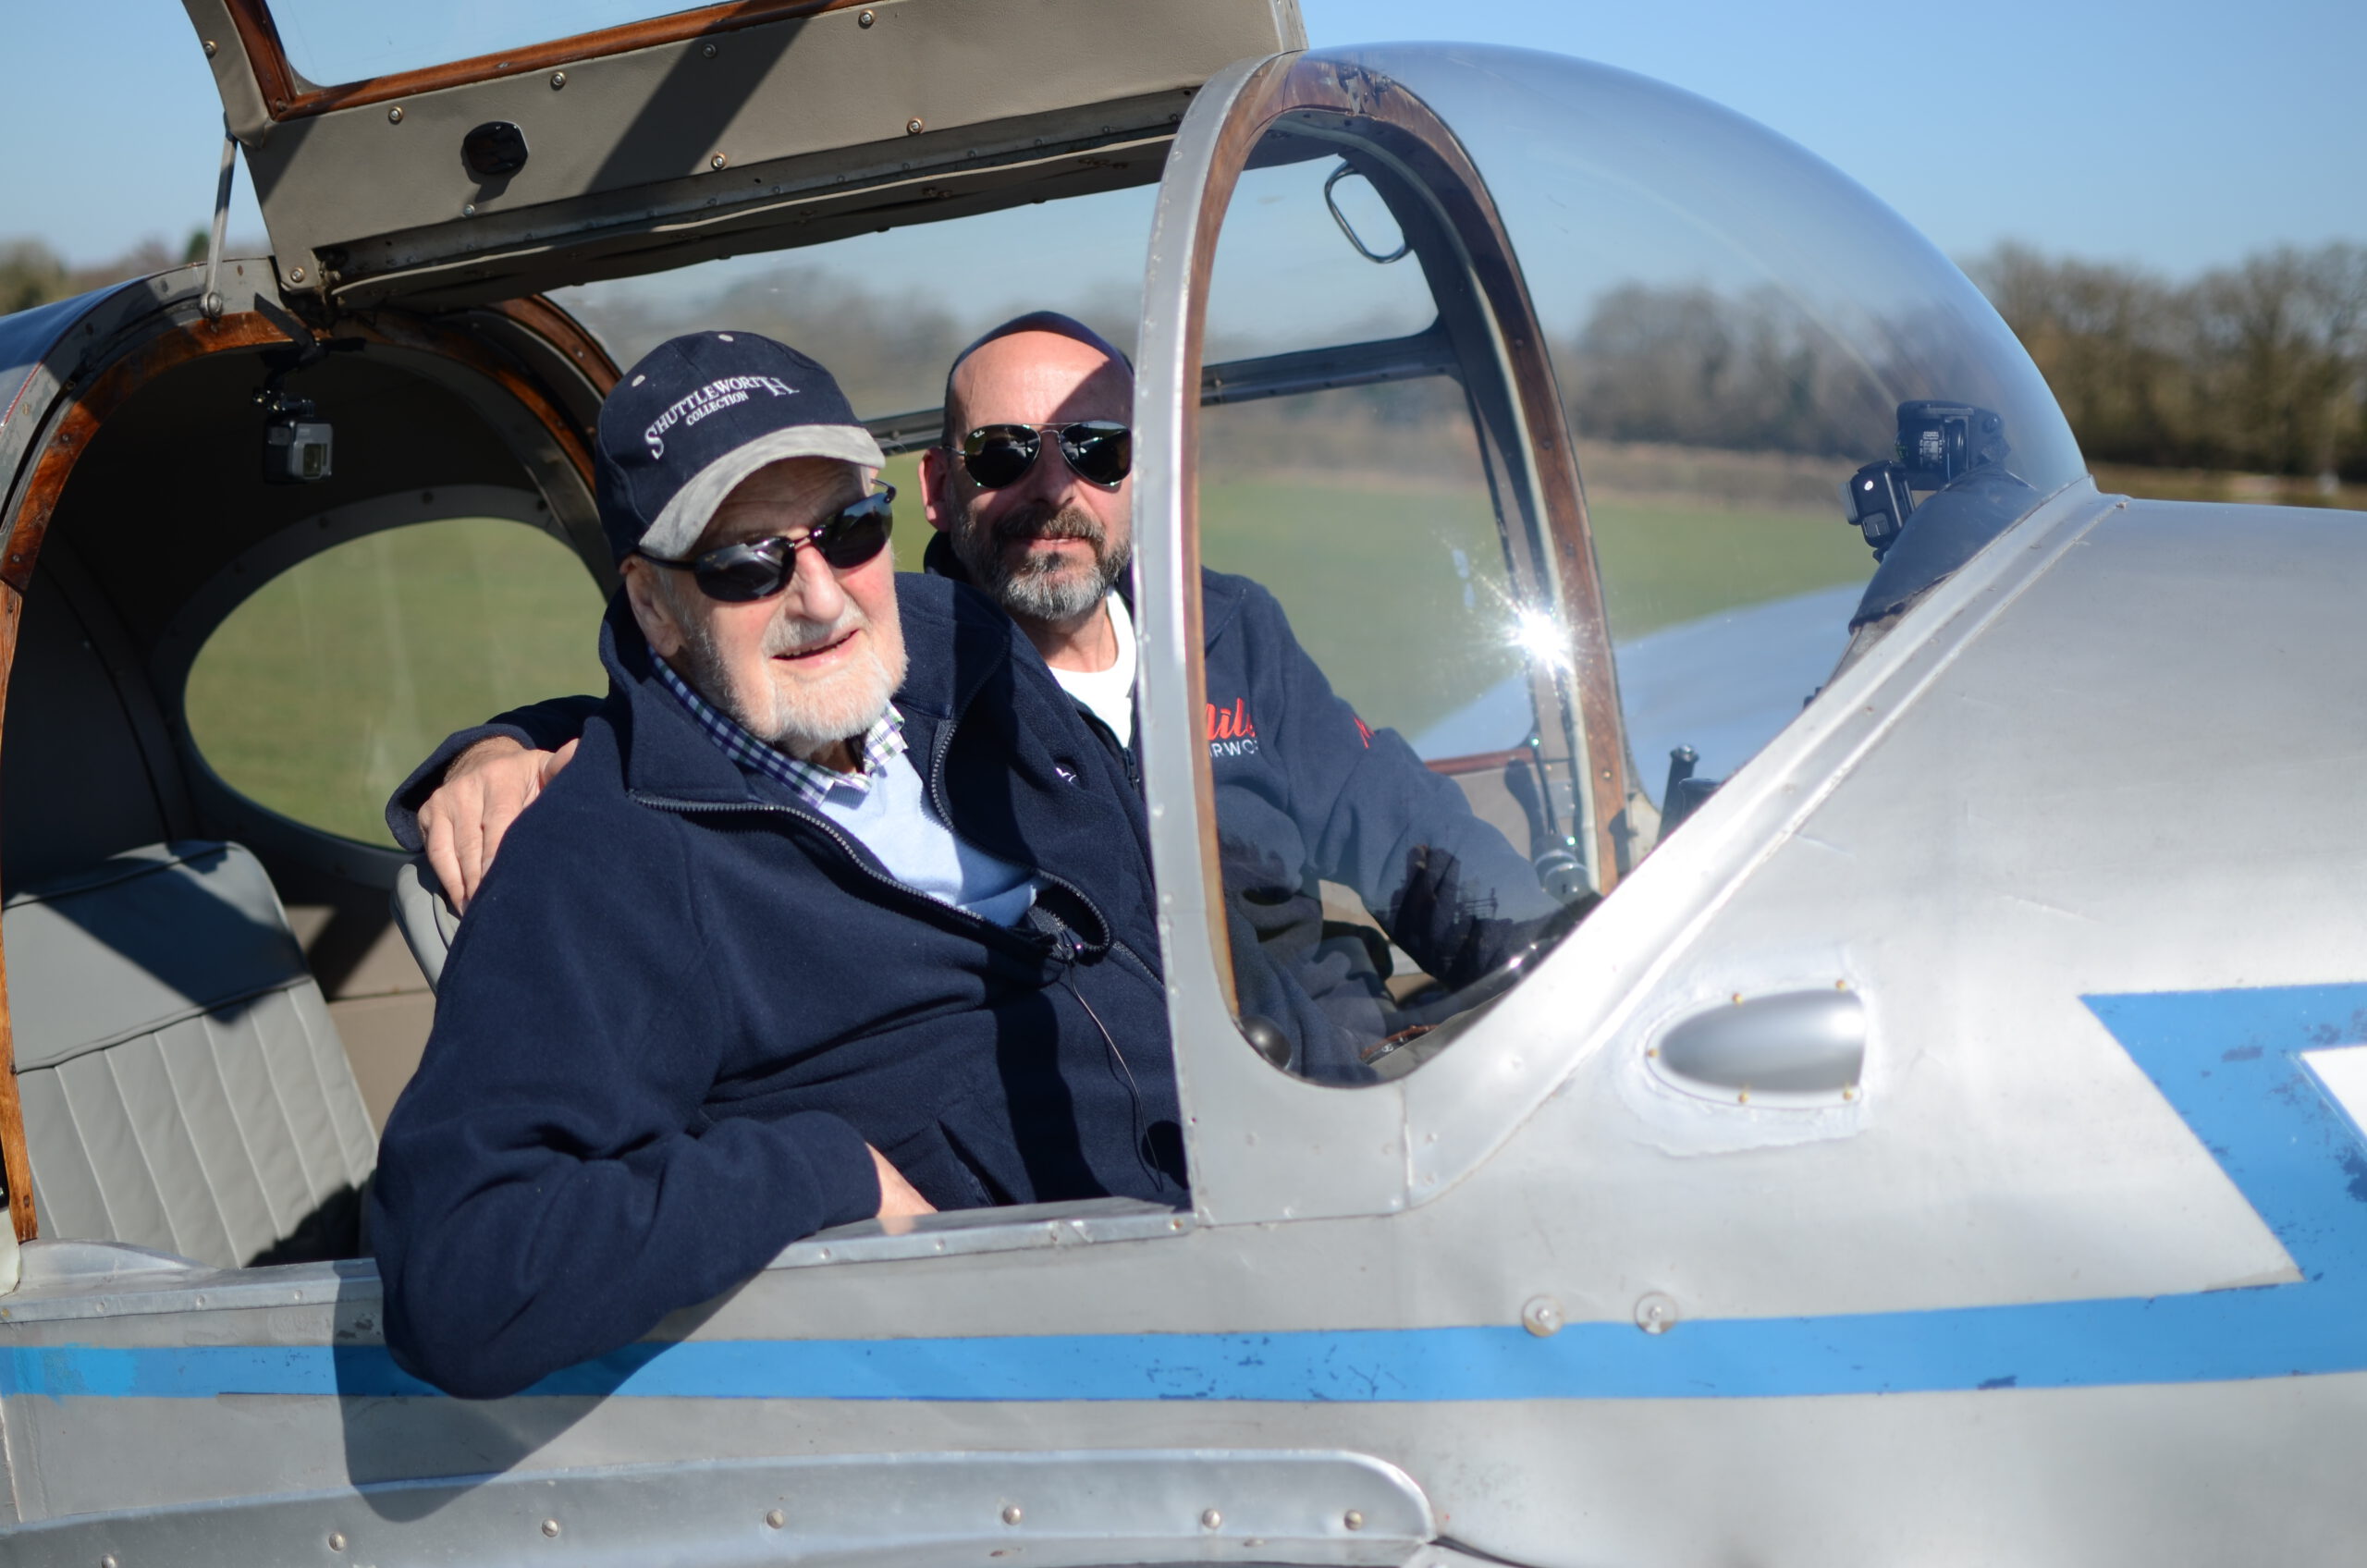 Featured image for “100 year old airman completes fundraising flight”